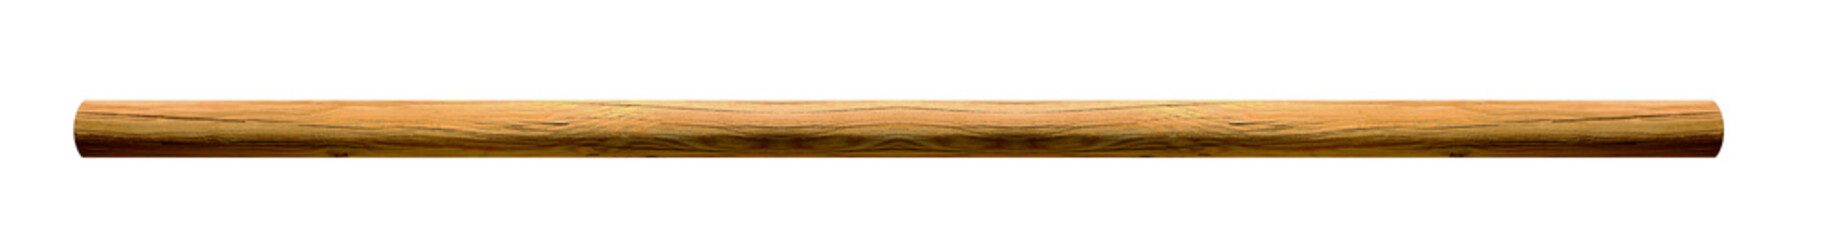 A medium-length horizontal wooden beam on isolated transparent background